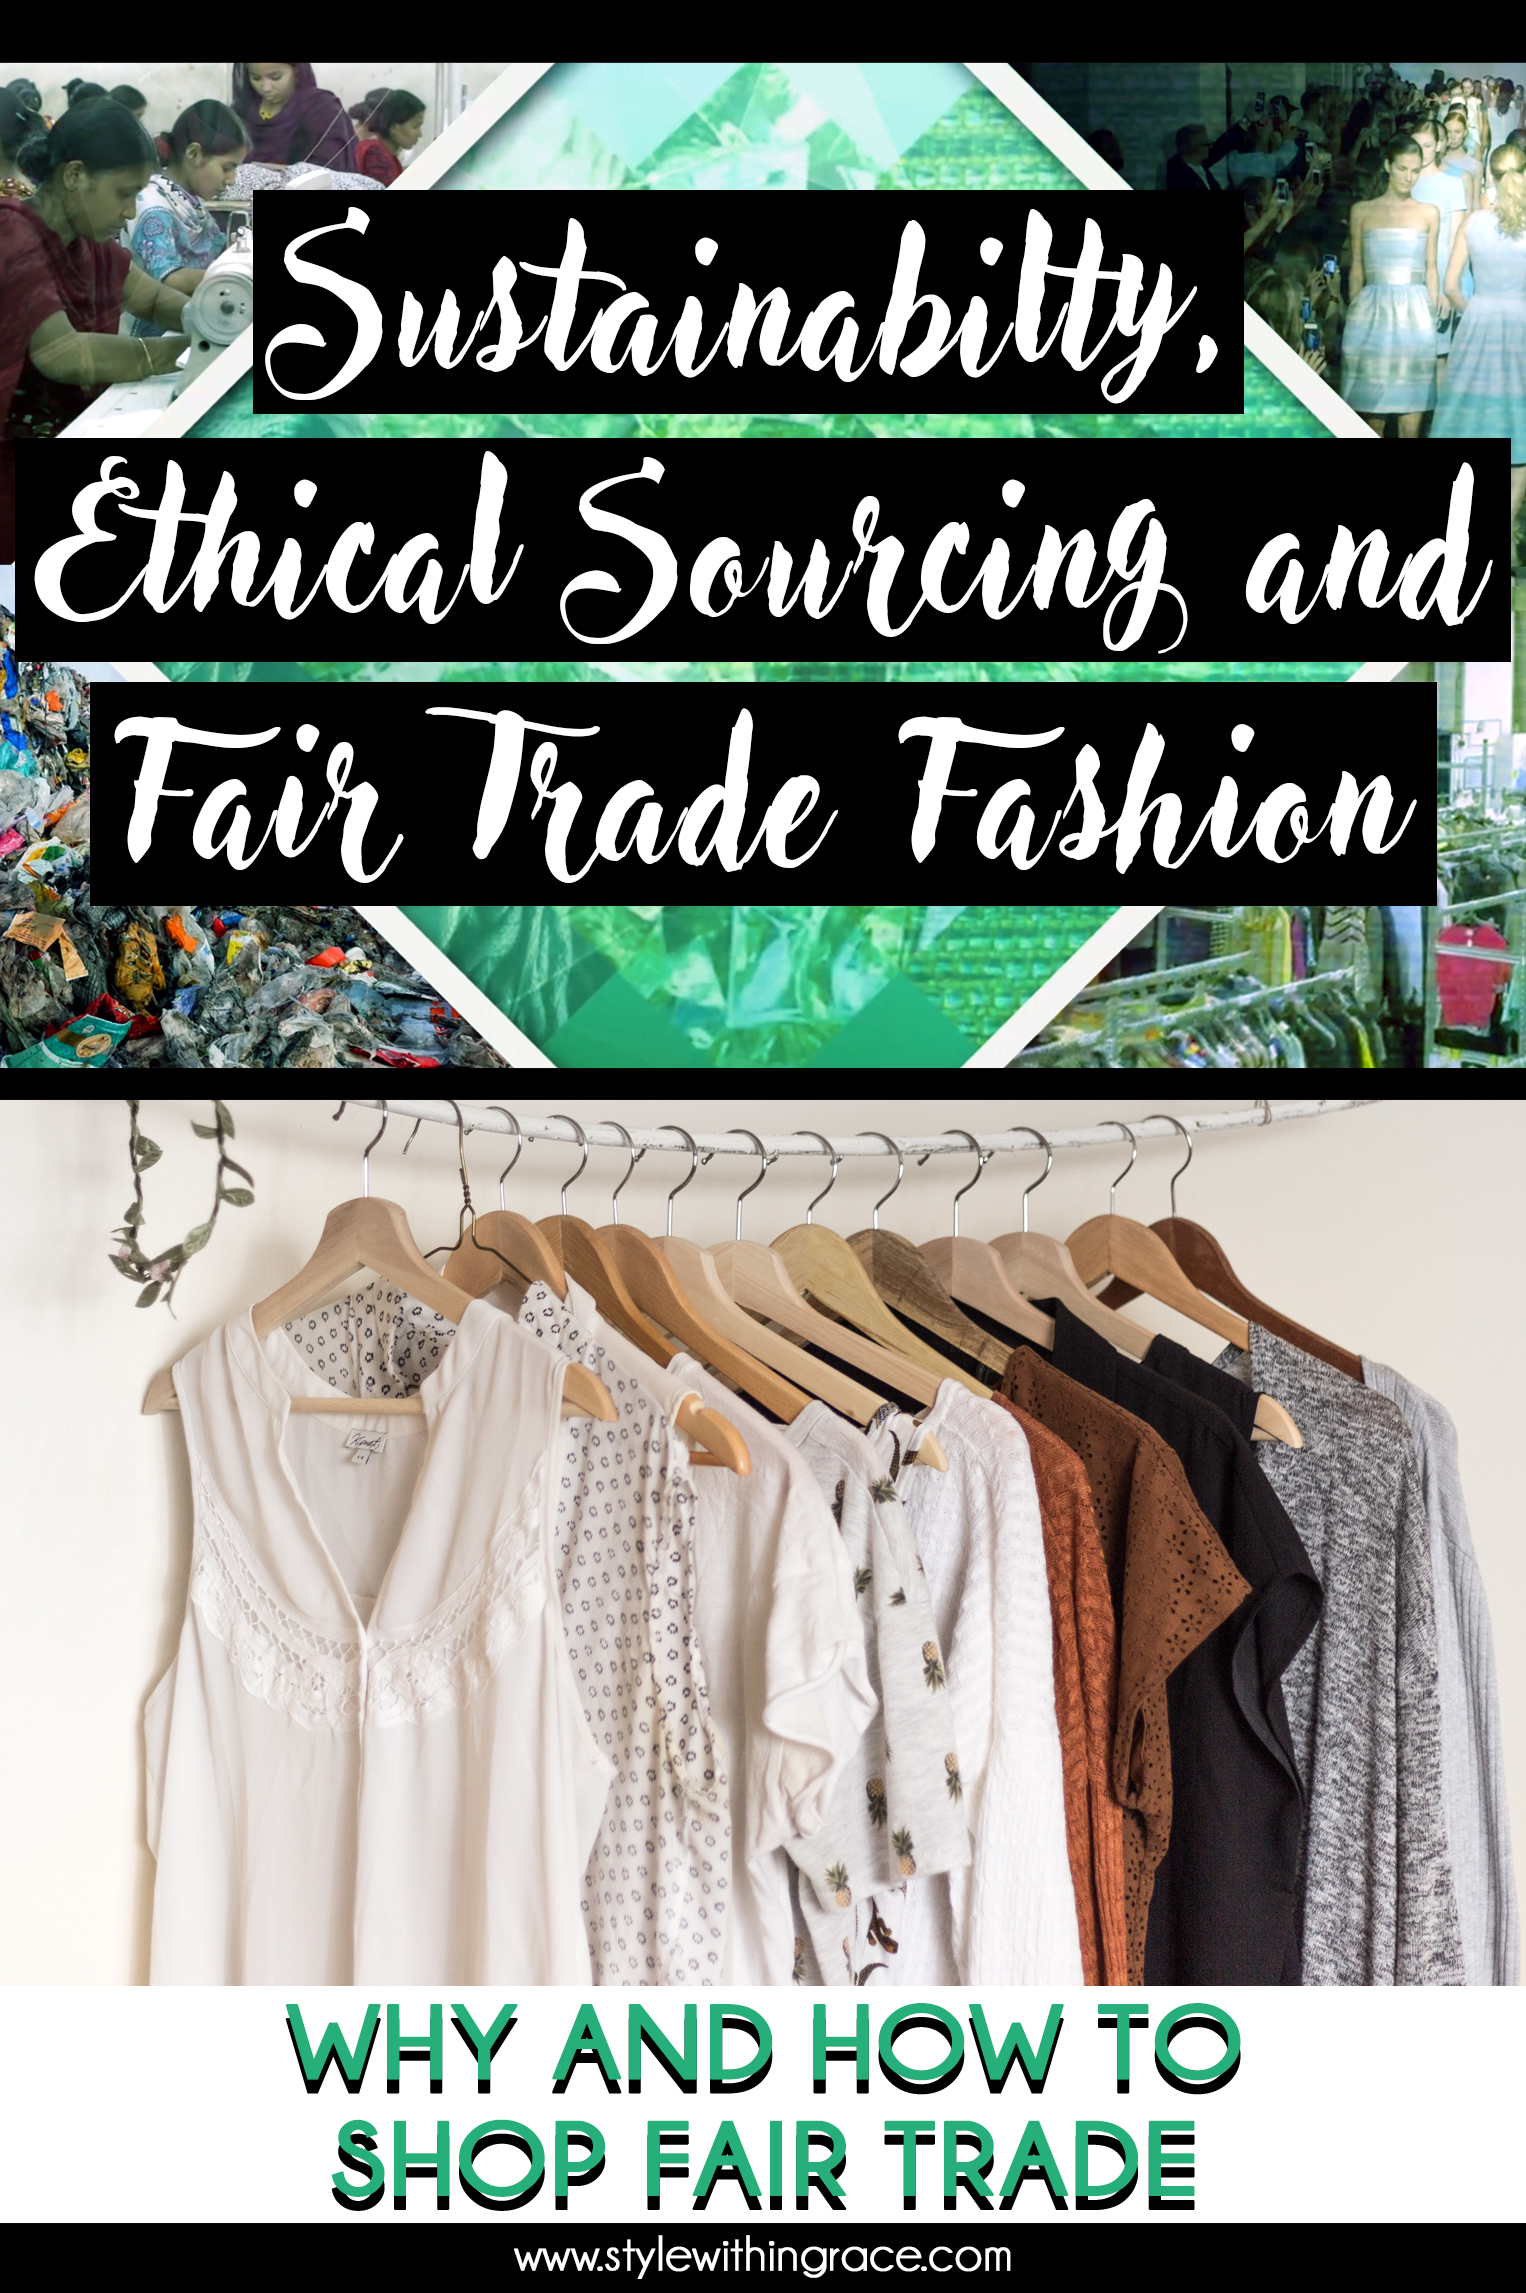 Sustainable and Ethical Fashion: Why and How to Shop Fair Trade Pinterest Image